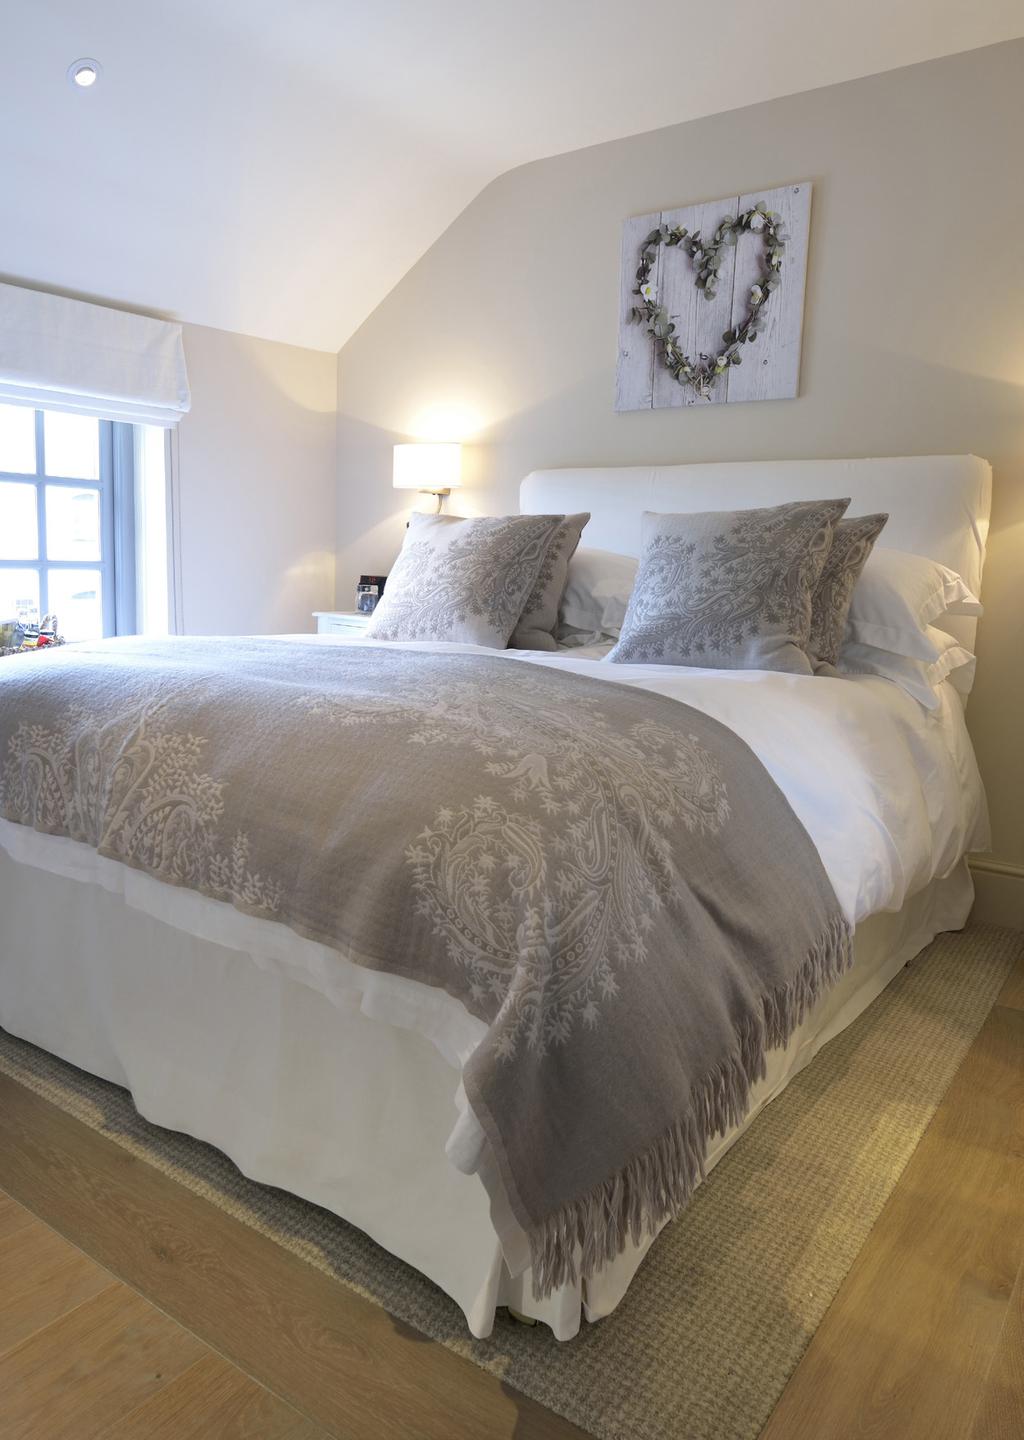 OUR BOUTIQUE BEDROOMS The Fuzzy Duck has 4 stunning bedrooms available for you and your guests. Each of our rooms is well stocked with the finest Baylis & Harding products for perfect pampering.